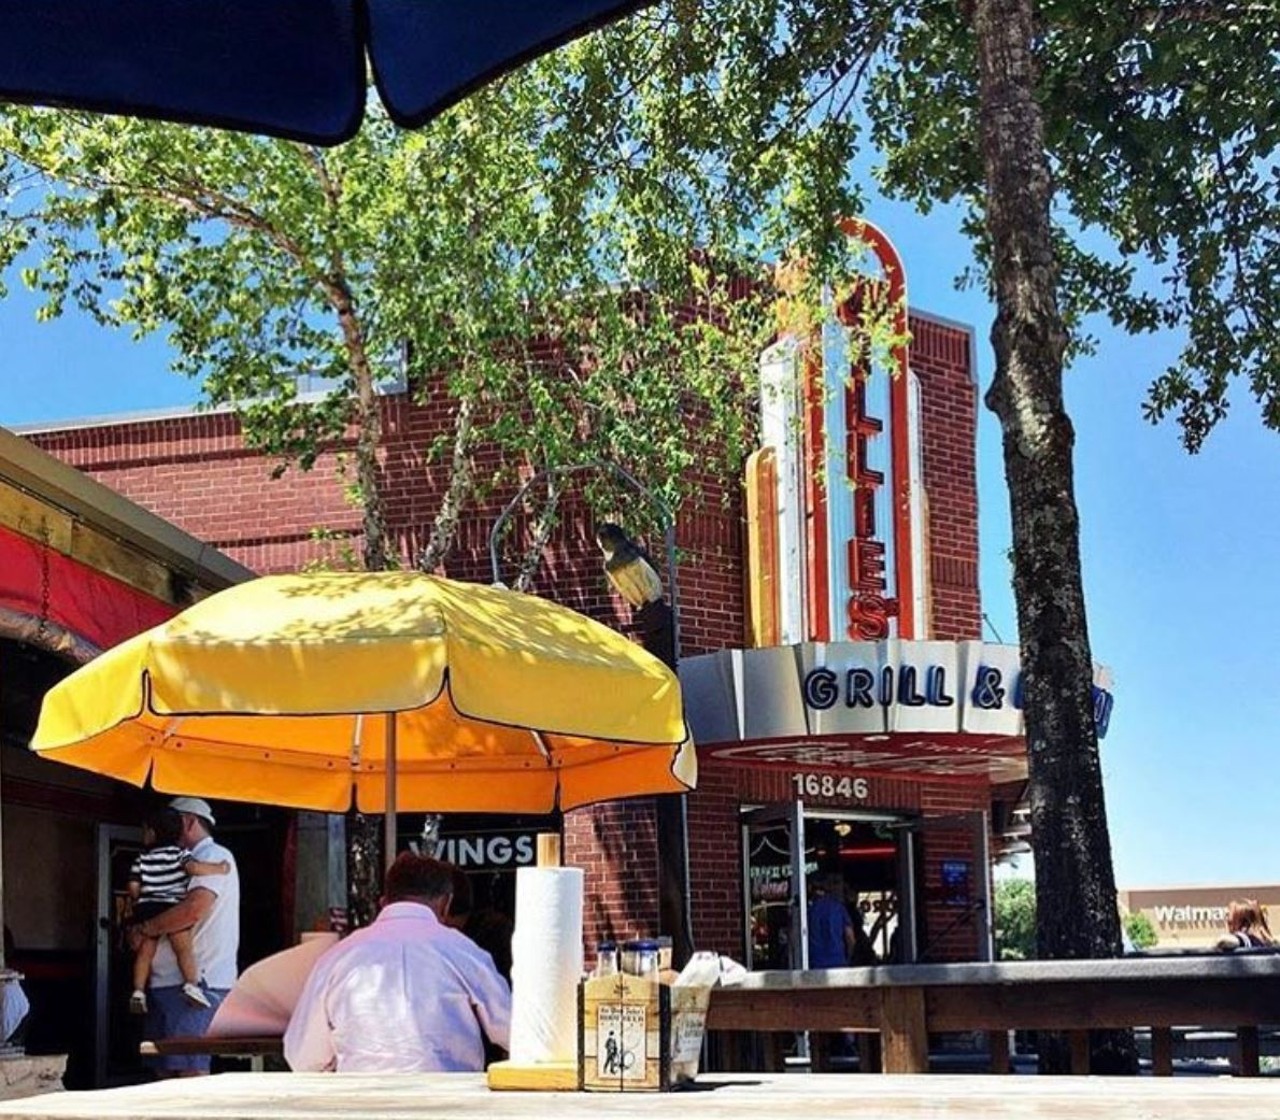 Willie’s Grill & Icehouse
Multiple locations, williesgrillandicehouse.com
Each Willie’s is a little bit different, but they’ve all got at least a few things in common. The first is having a play area for kids, the second is ice-cold drinks and the third is tasty fried mushrooms.
Photo via Instagram / williesgrill